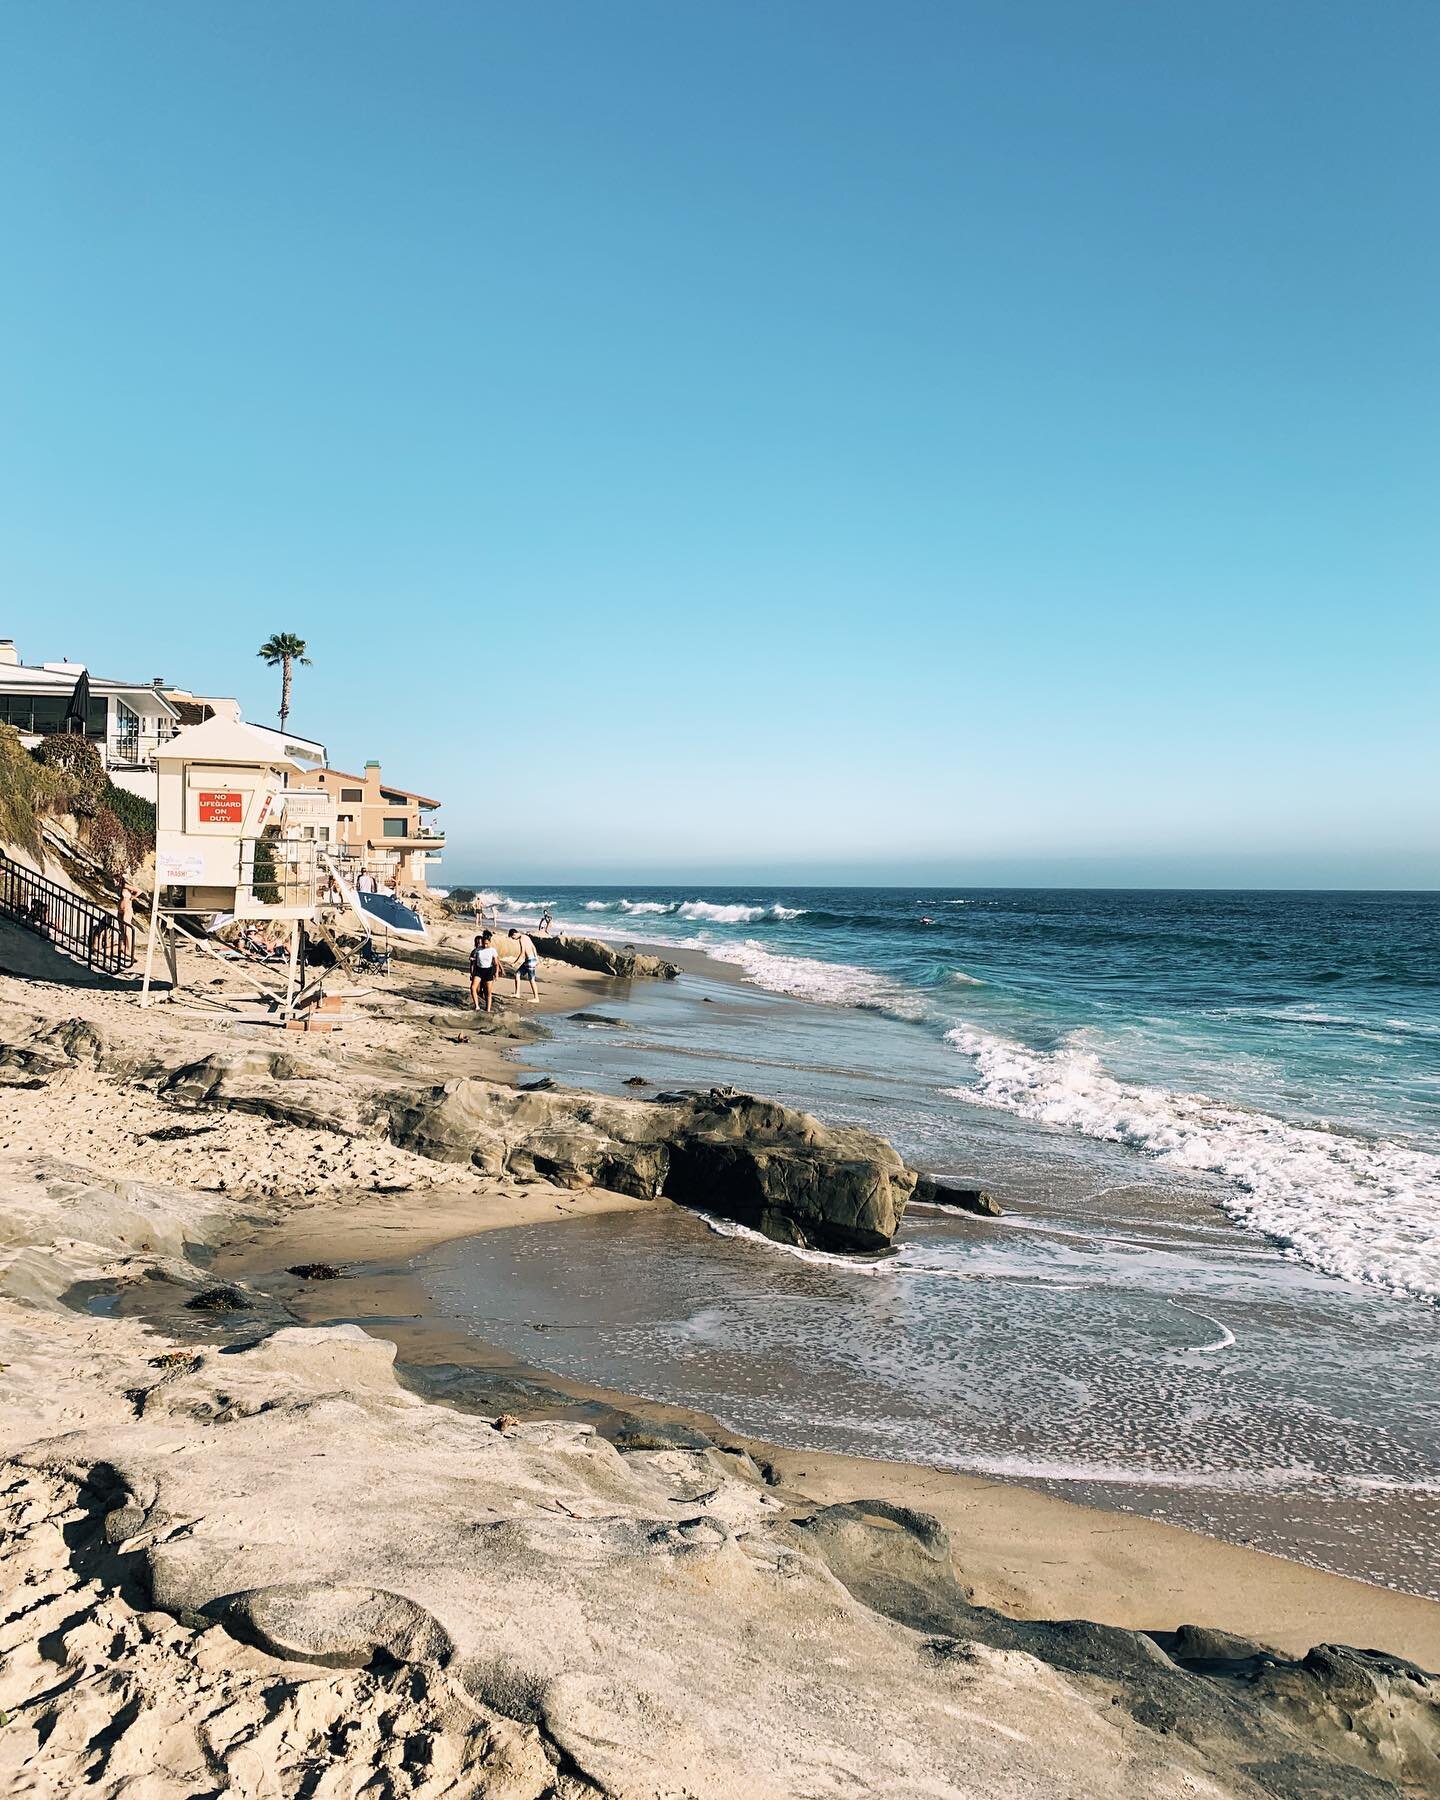 Our last day in Cali, we bopped over to Newport Beach and then down to Laguna! It was such a great way to wind down from such an insane 3 days. David showed us some of his favorite spots and I drove everyone nuts by remarking about how I&rsquo;d tota